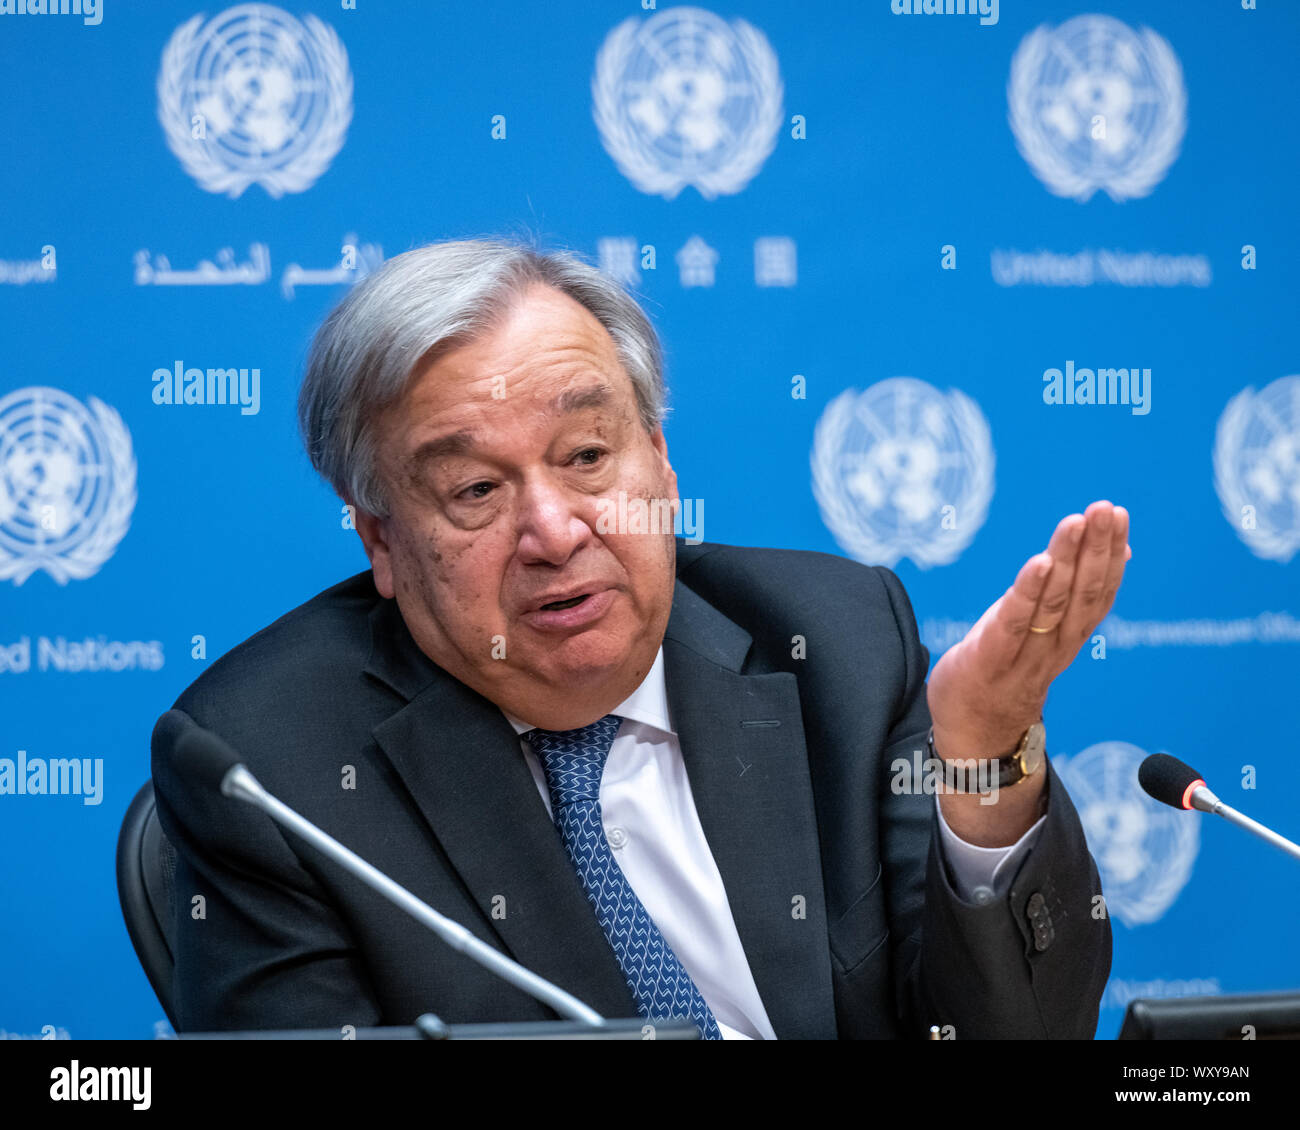 New York, USA,  18 September 2019.  United Nations Secretary-General Antonio Guterres answers a question during a news briefing to mark the opening of the 74th session of the UN General Assembly in New York City.   Credit: Enrique Shore/Alamy Live News Stock Photo